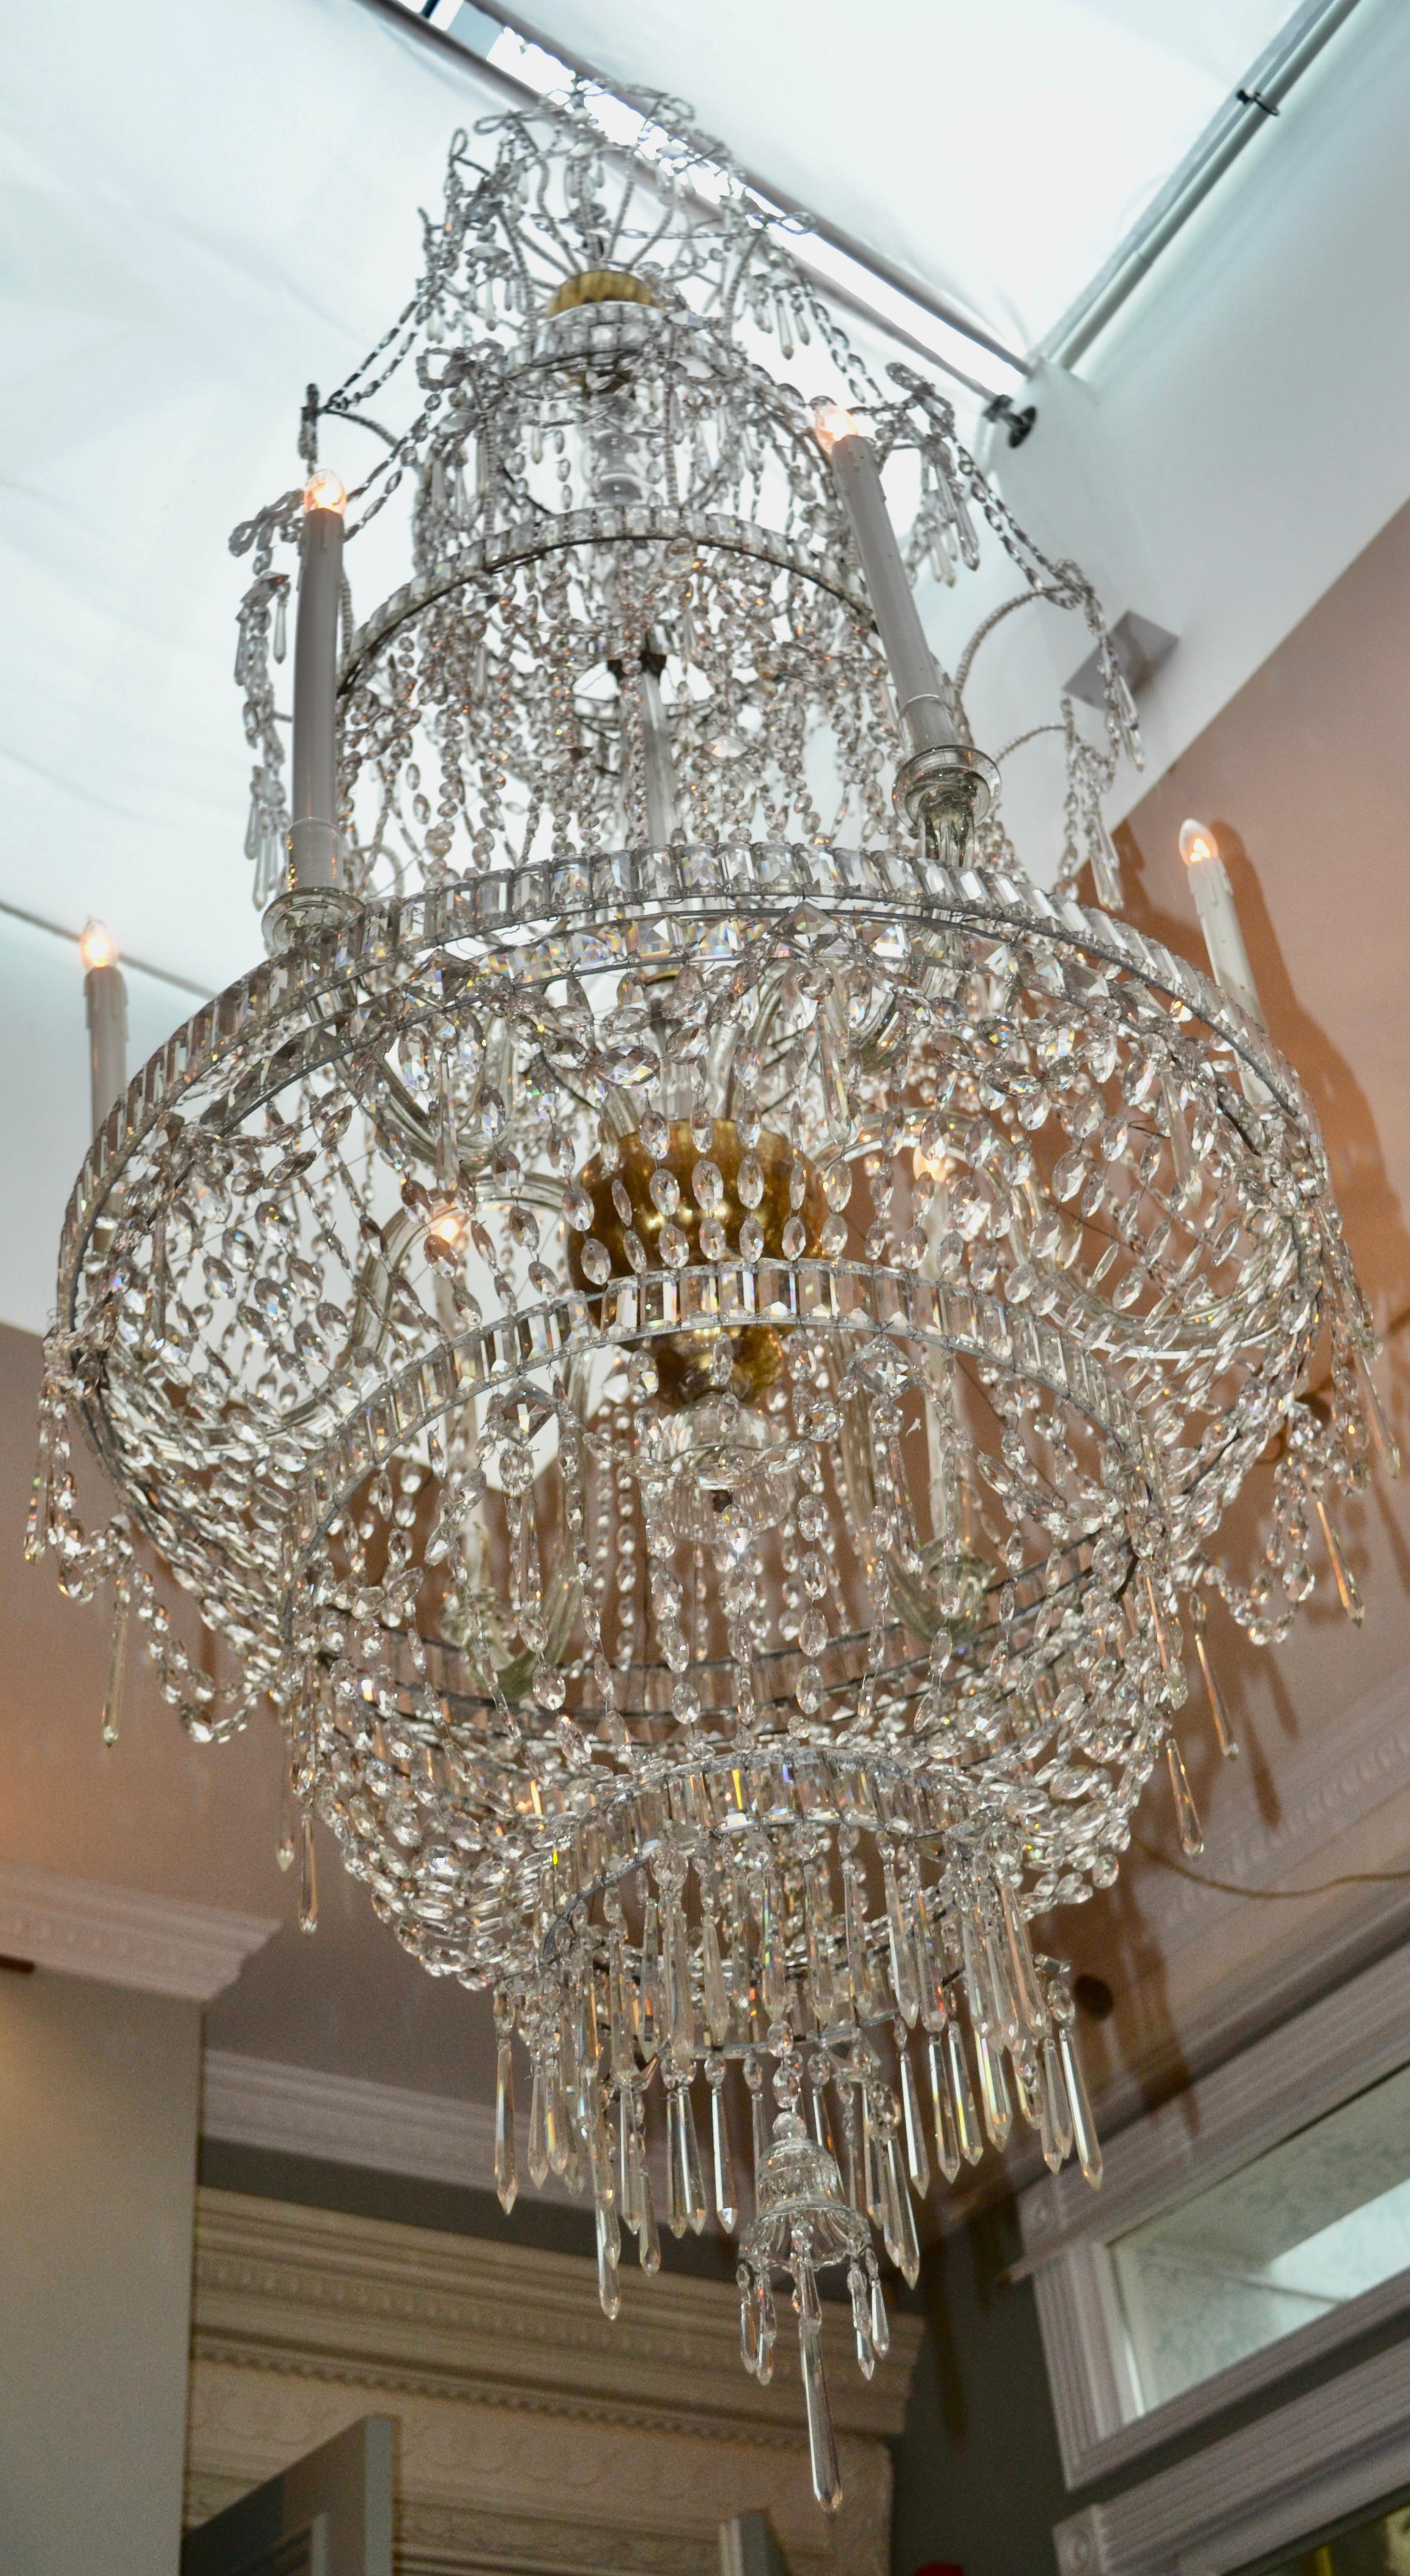 18th Century Crystal Chandelier from the Royal Crystal Manufacturer La Granja In Good Condition For Sale In Vancouver, British Columbia